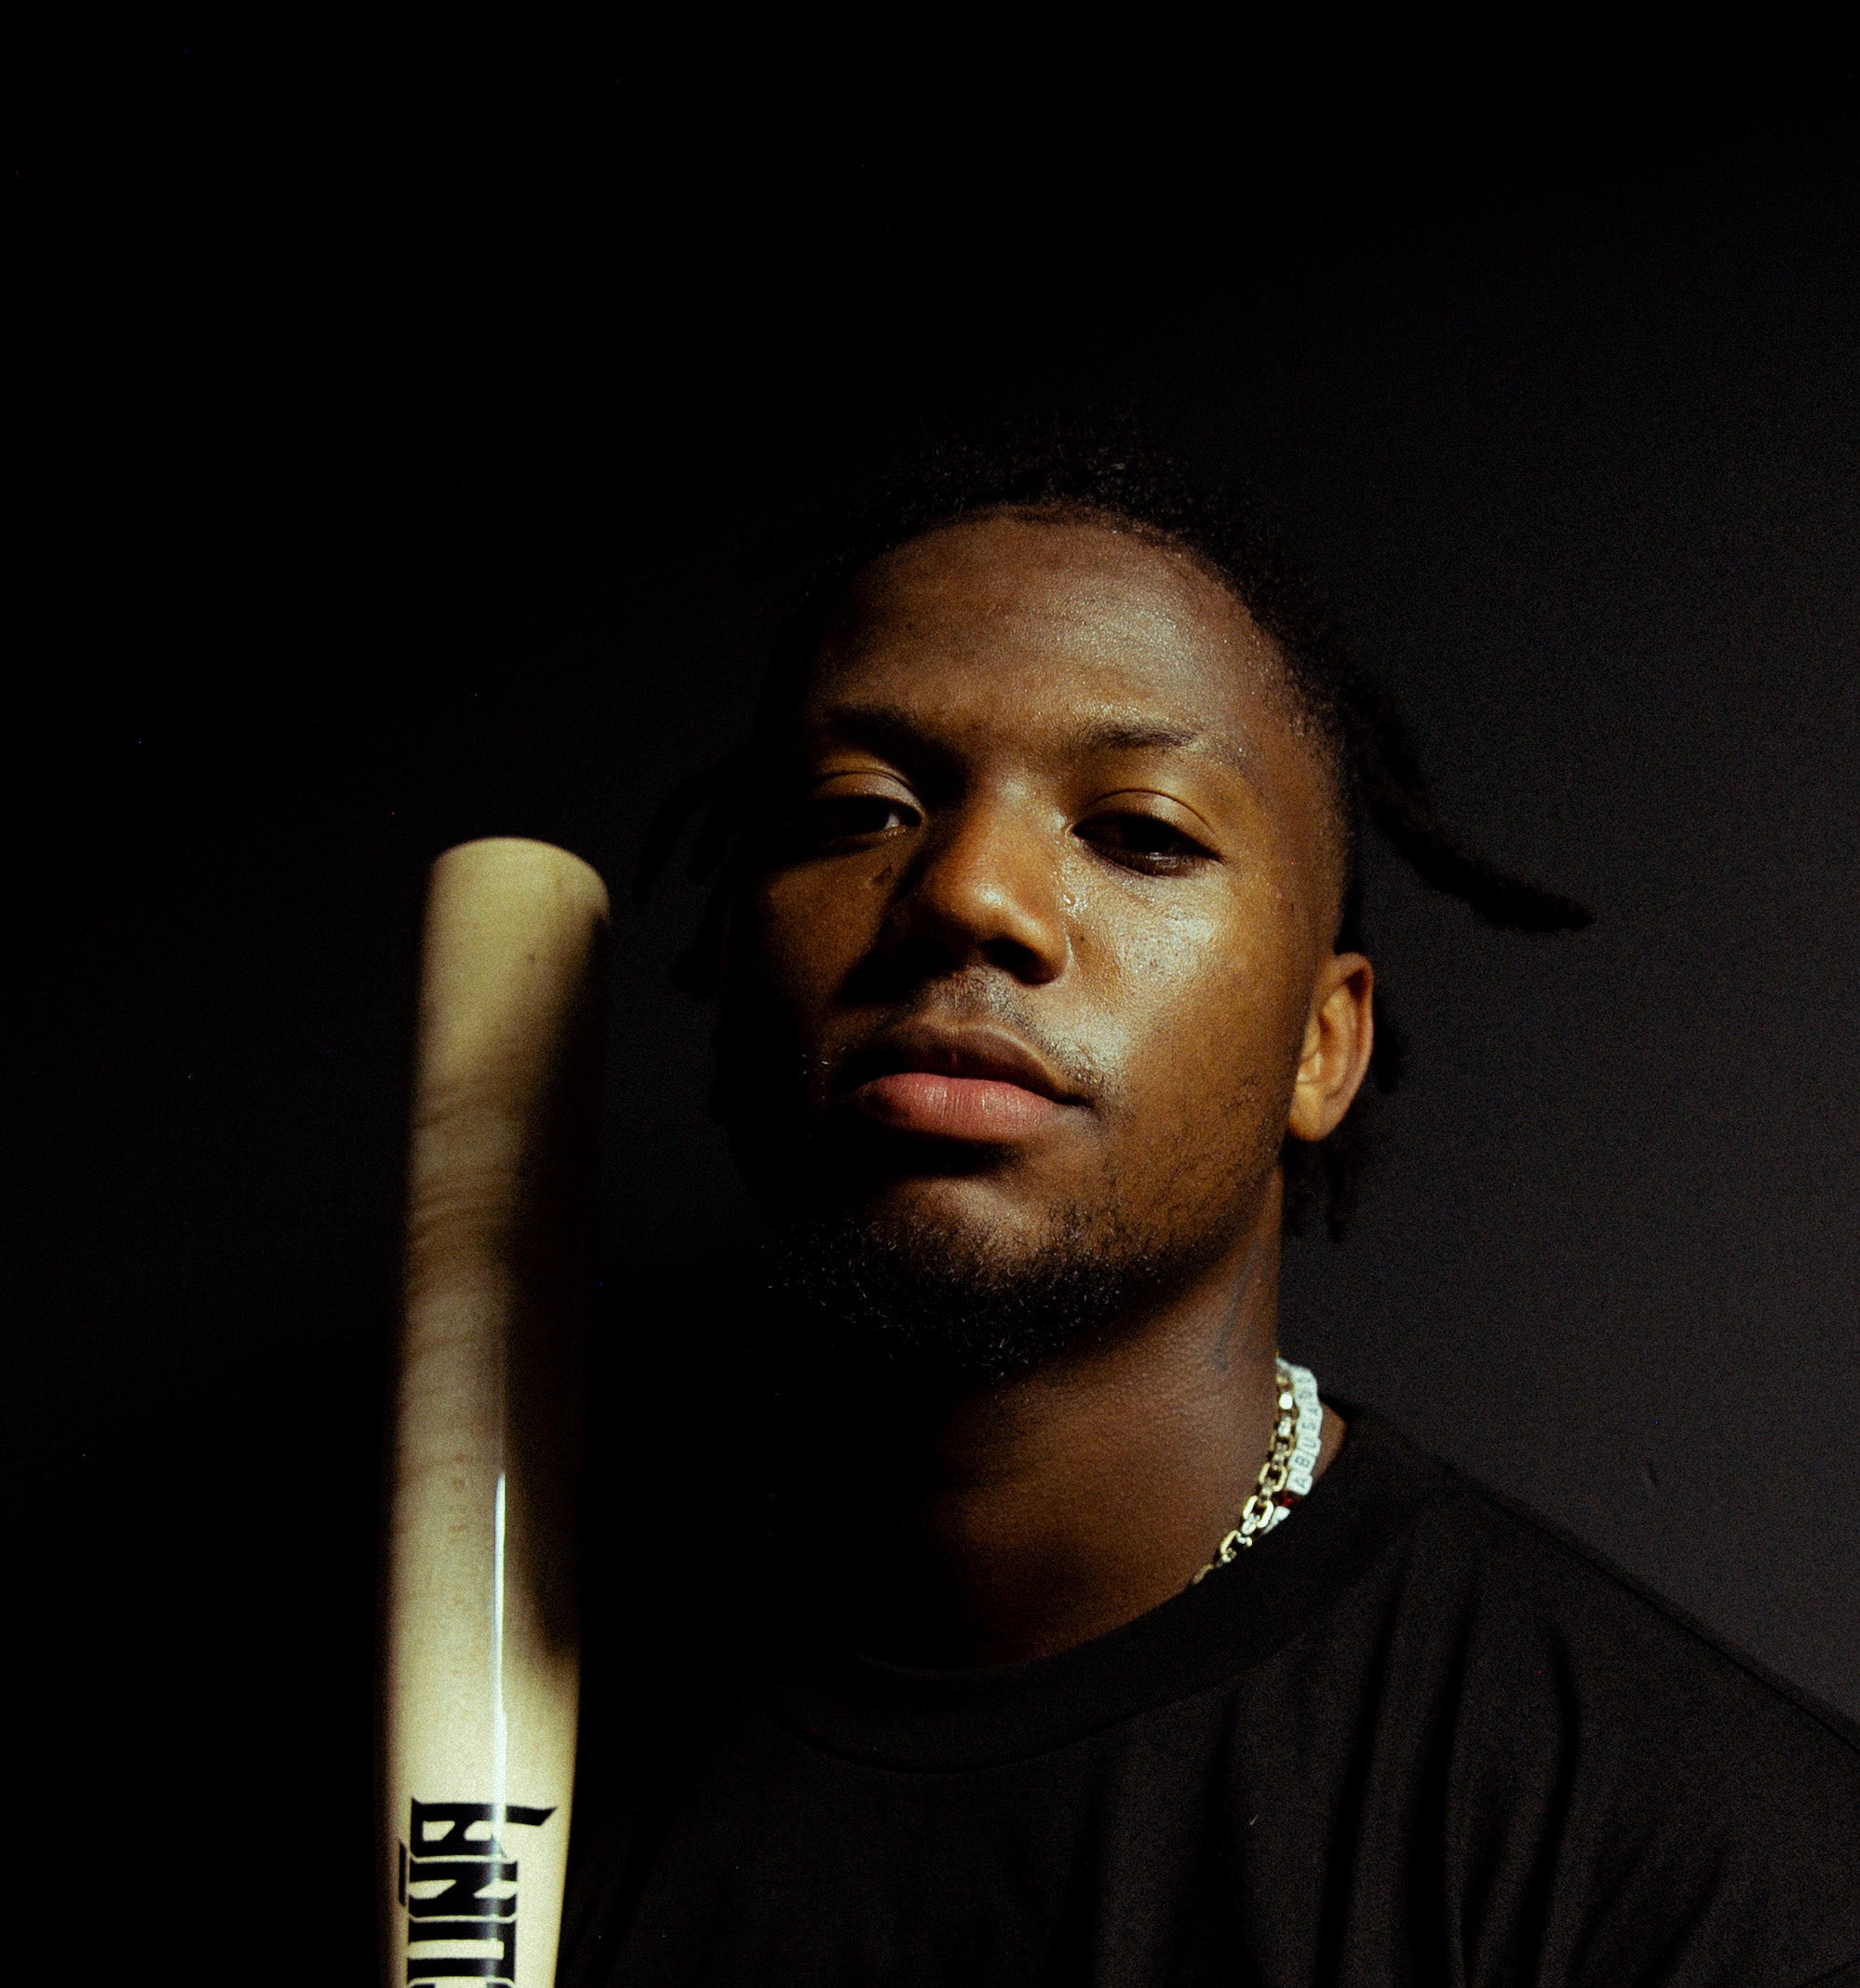 Ronald Acuña wearing a black tee shirt and holding a baseball bat with the "Acuña" logo on it